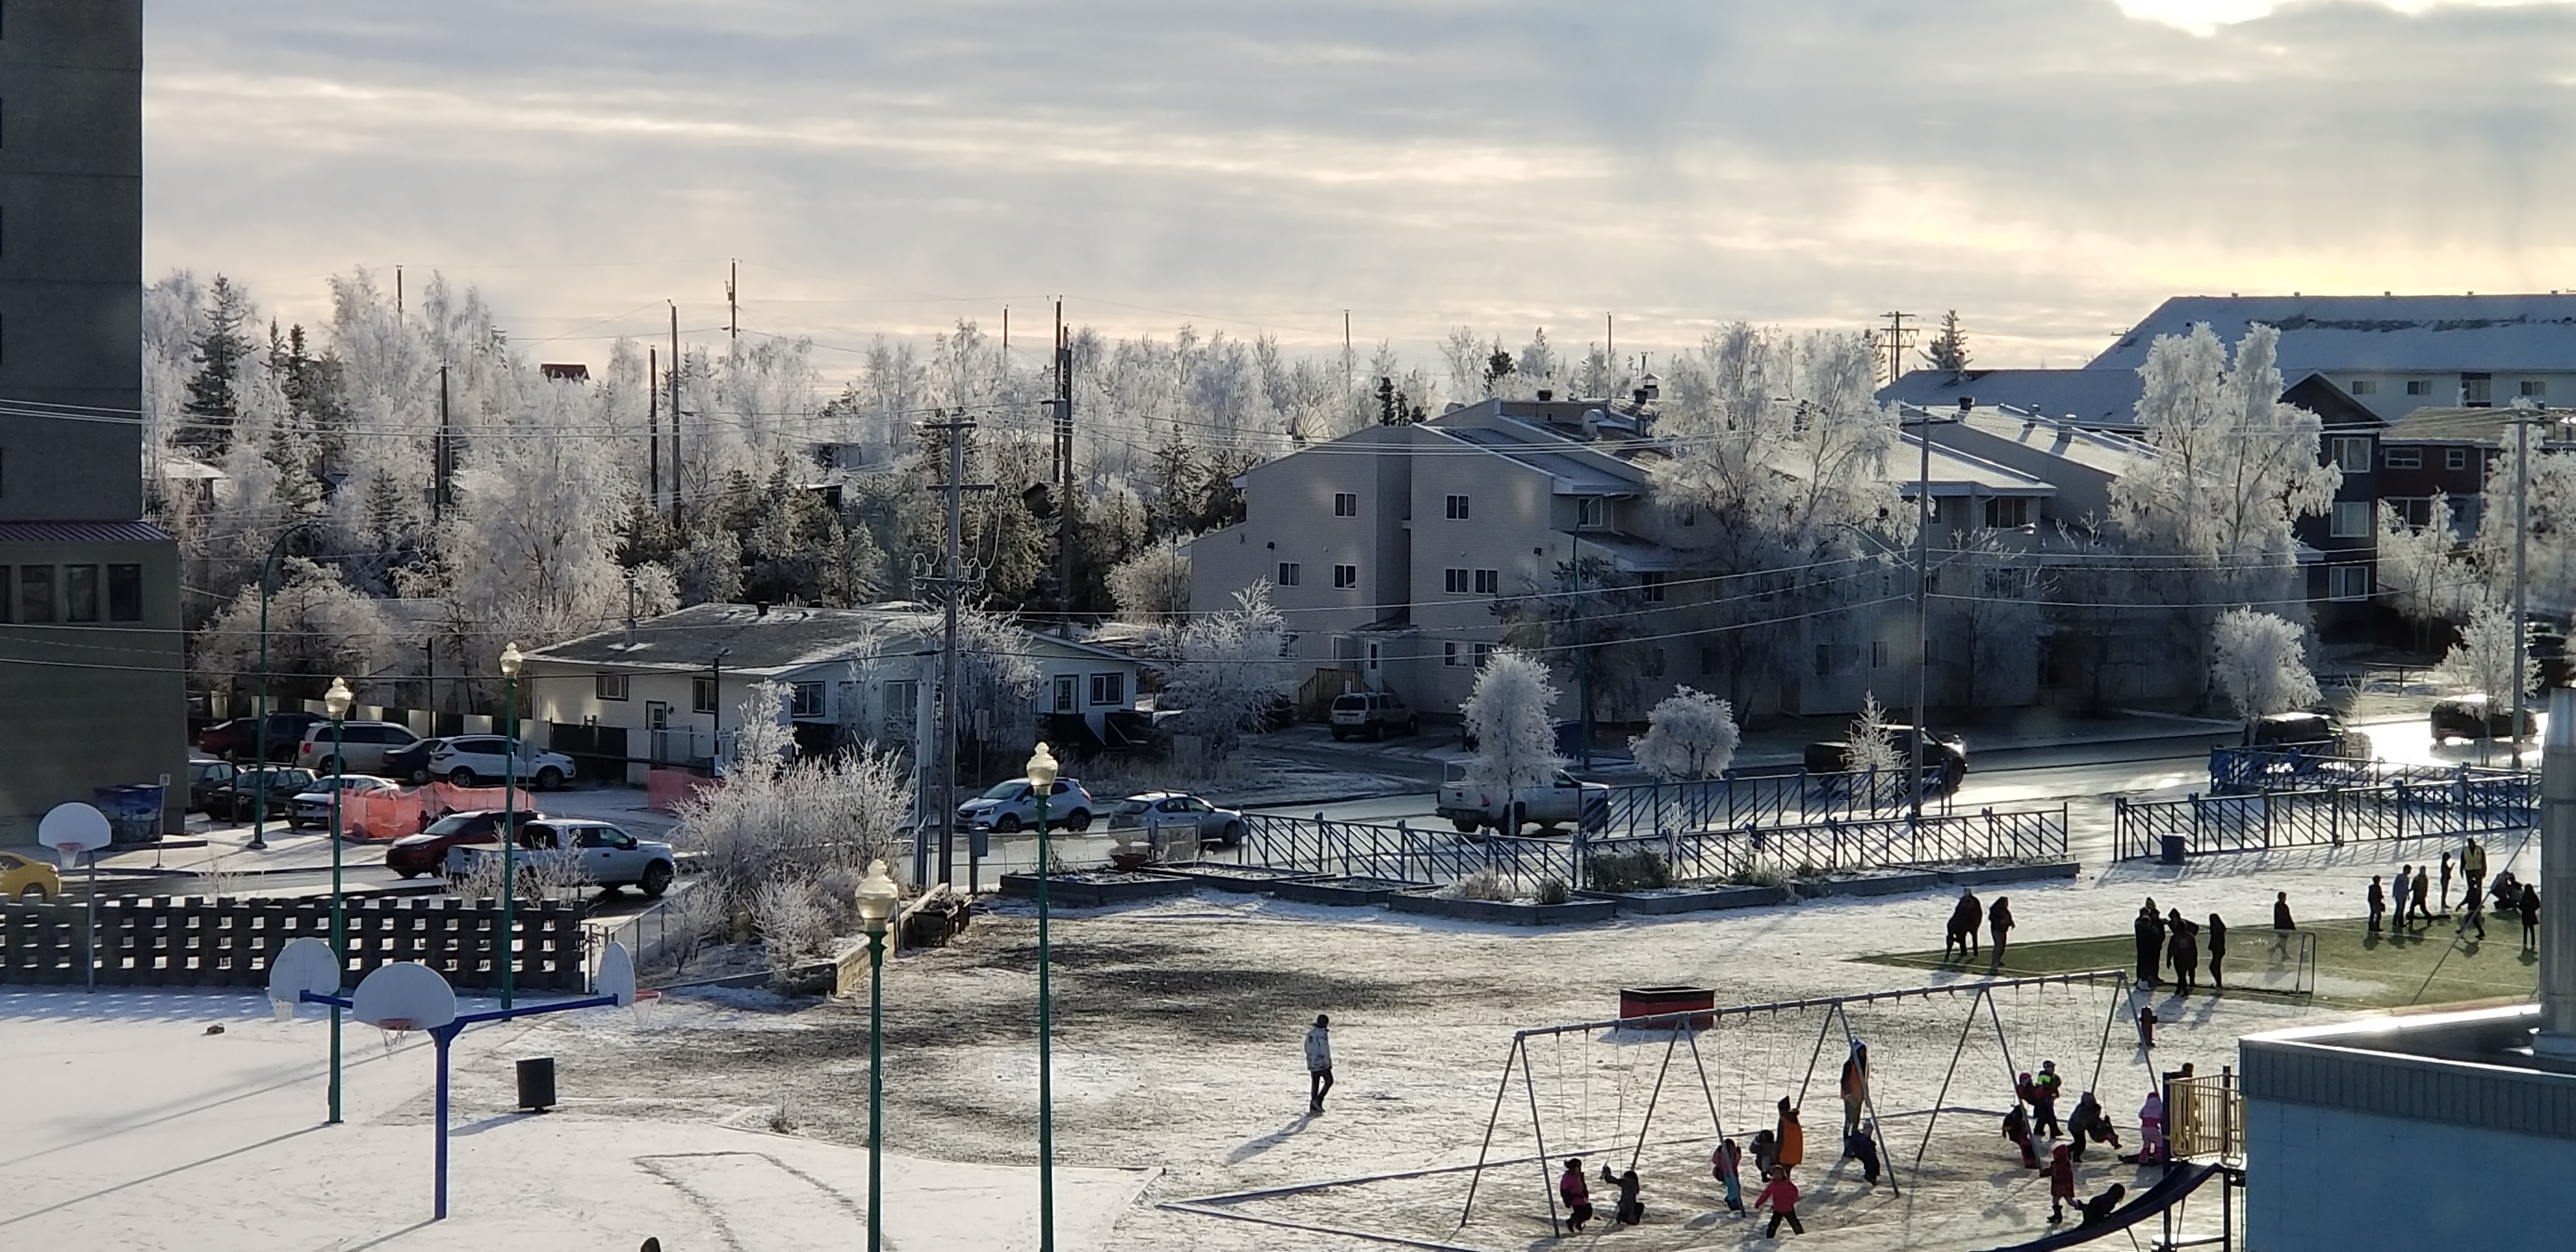 View of the Mildred Hall School playground in Downtown Yellowknife from the Stantec office (late November)